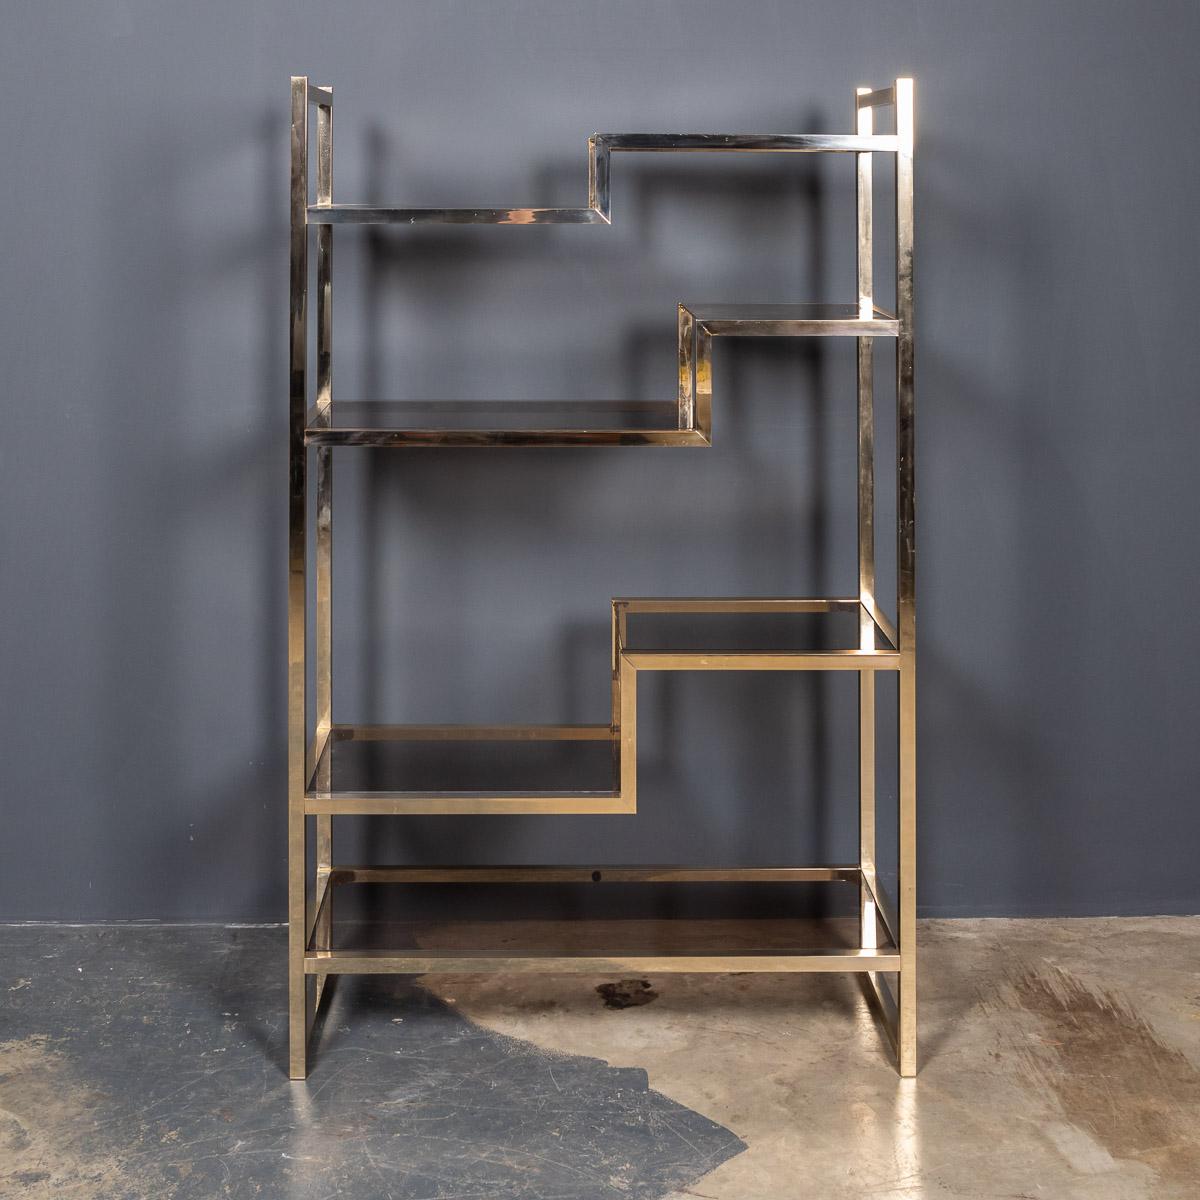 An elegant Italian made solid brass etagere display shelves, comprising of seven staggered, smoked glass shelves, of varying sizes, made and designed in the 1970's.

Measures: Height: 158cm
Width: 99cm
Depth: 37cm.